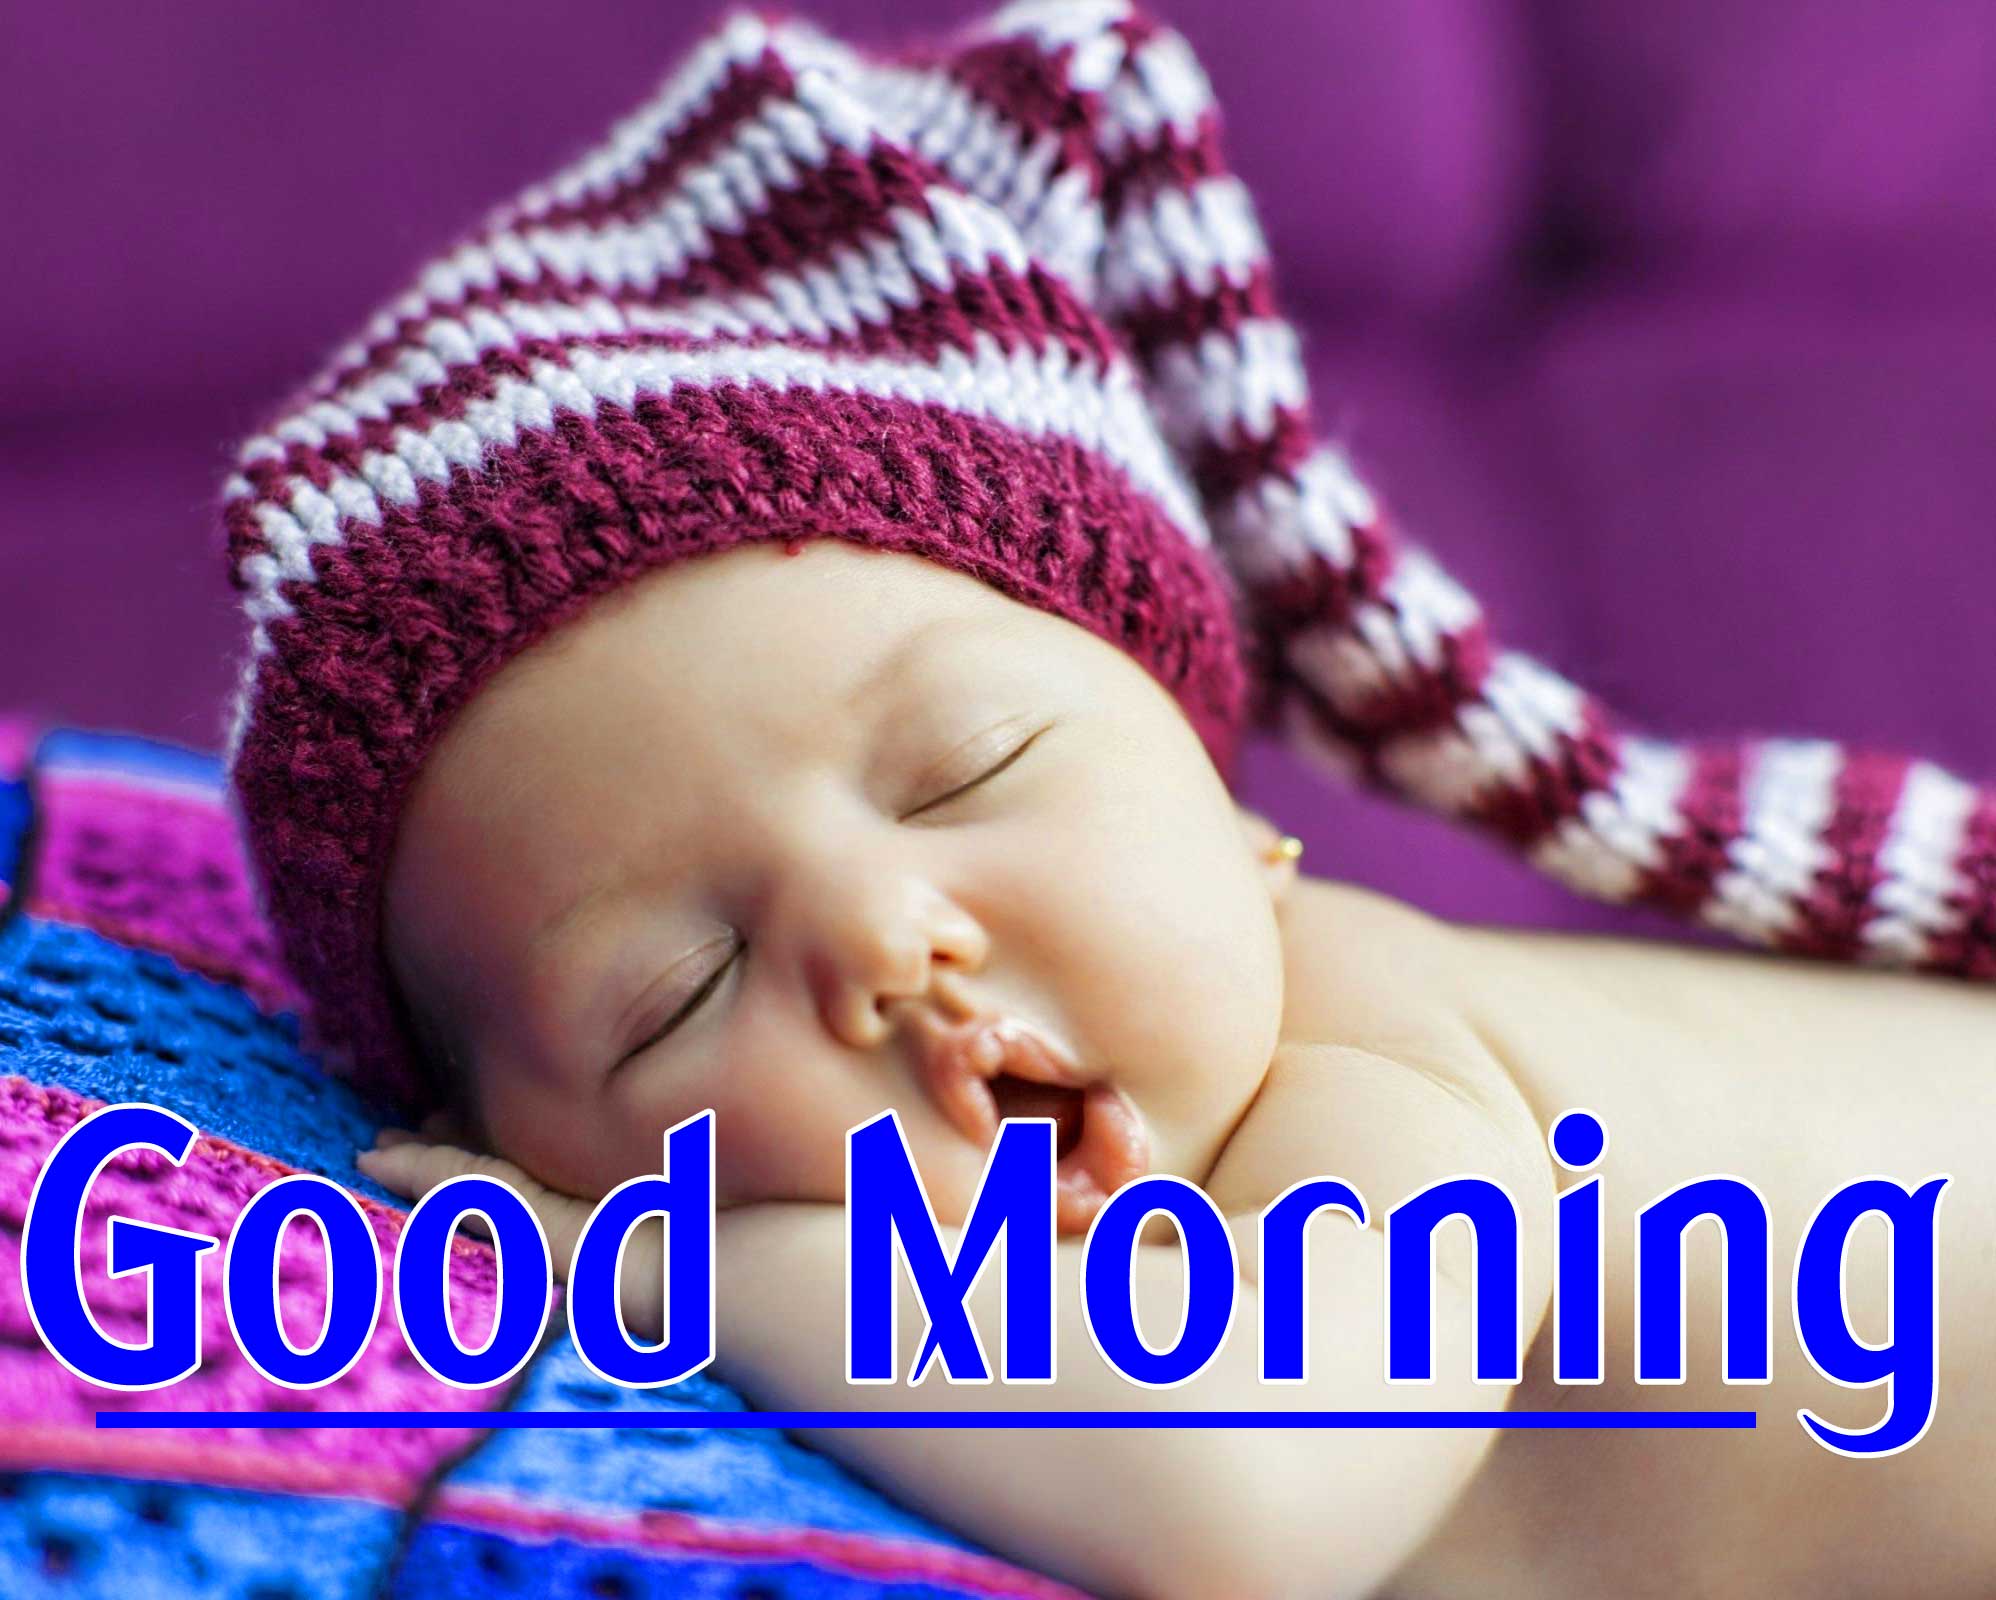 Good Morning Baby Images (19) – Good Morning Images | Good Morning Photo HD  Downlaod | Good Morning Pics Wallpaper HD